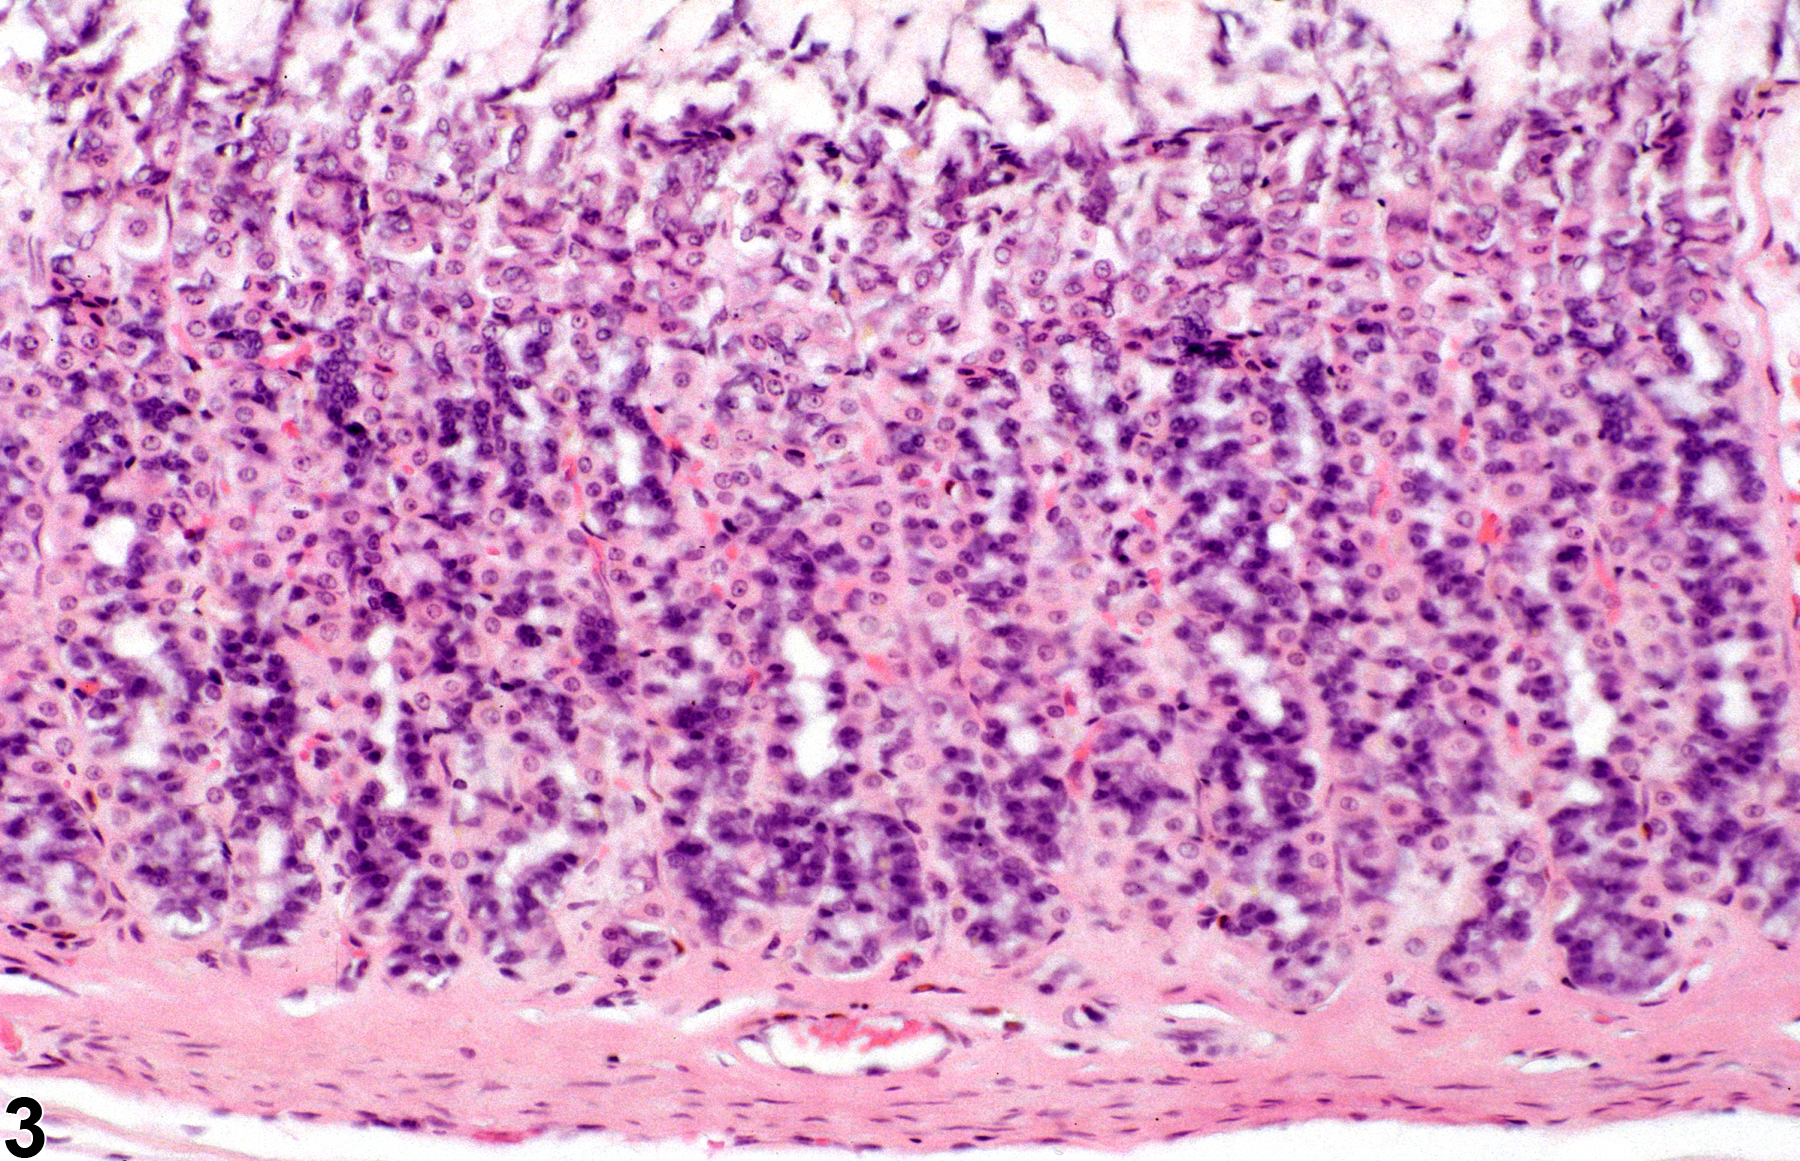 Image of atrophy in the glandular stomach from a male F344/N rat in a subchronic study